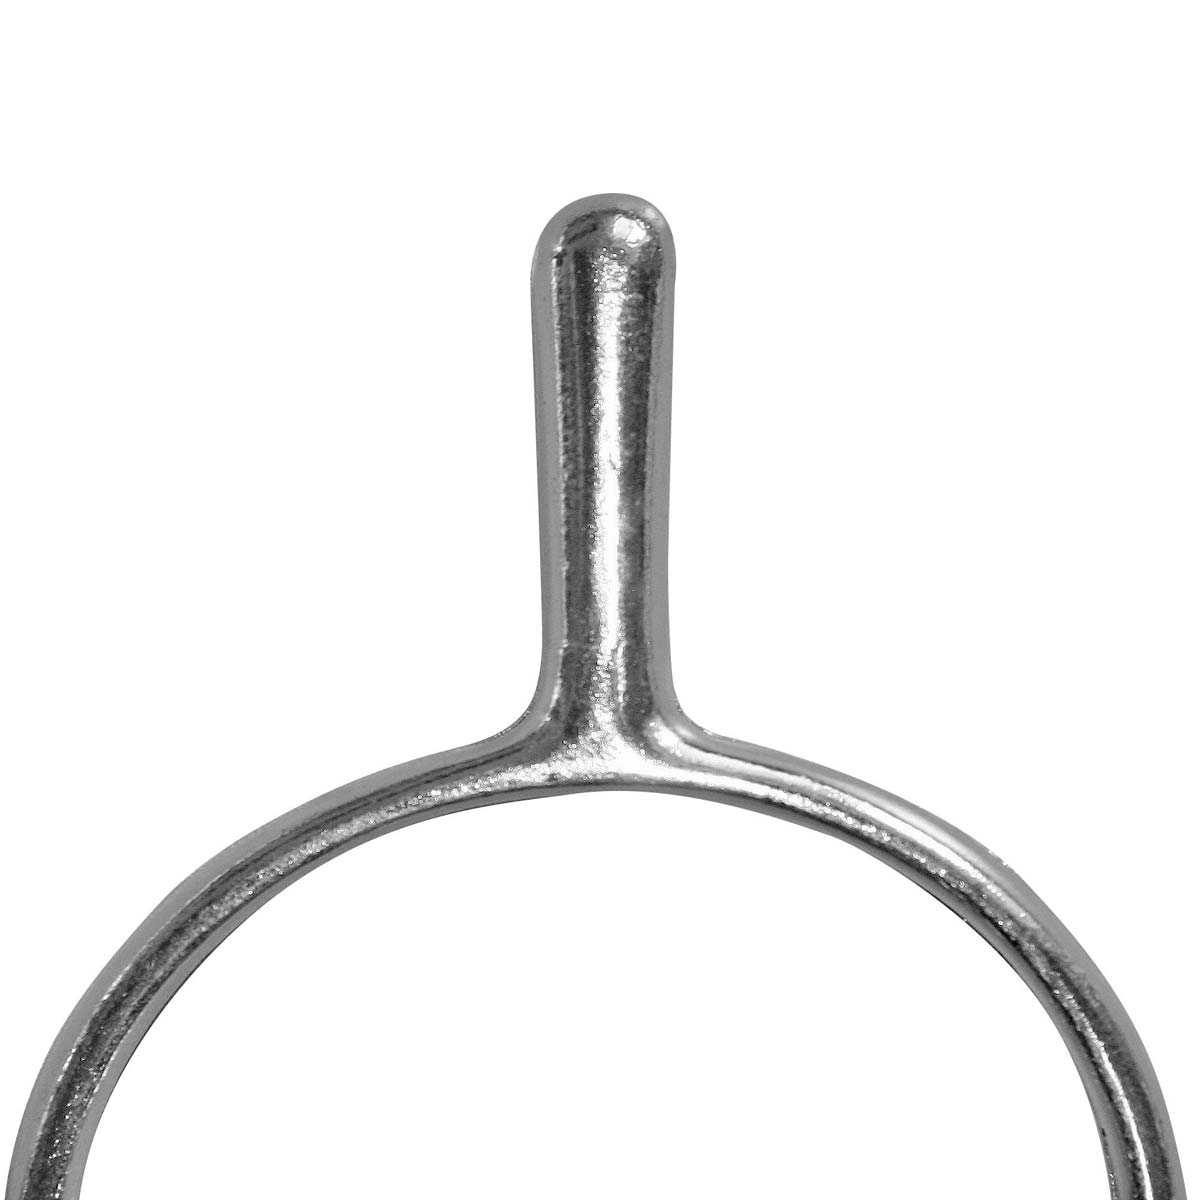 Covalliero spurs ball with straps